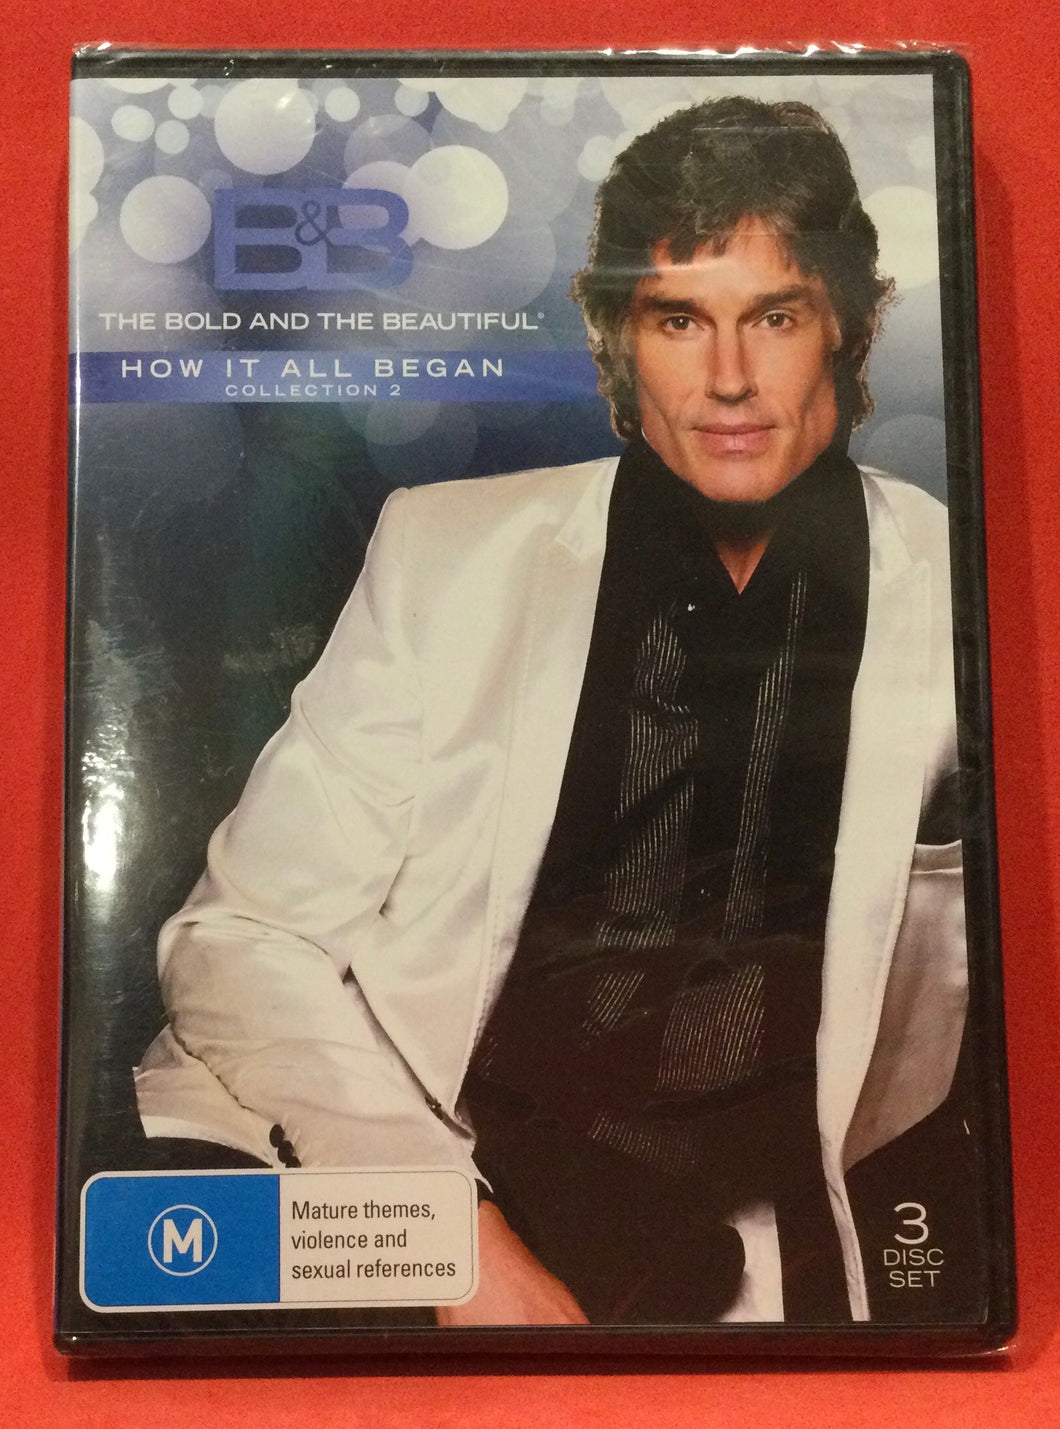 BOLD AND THE BEAUTIFUL RON MOSS DVD